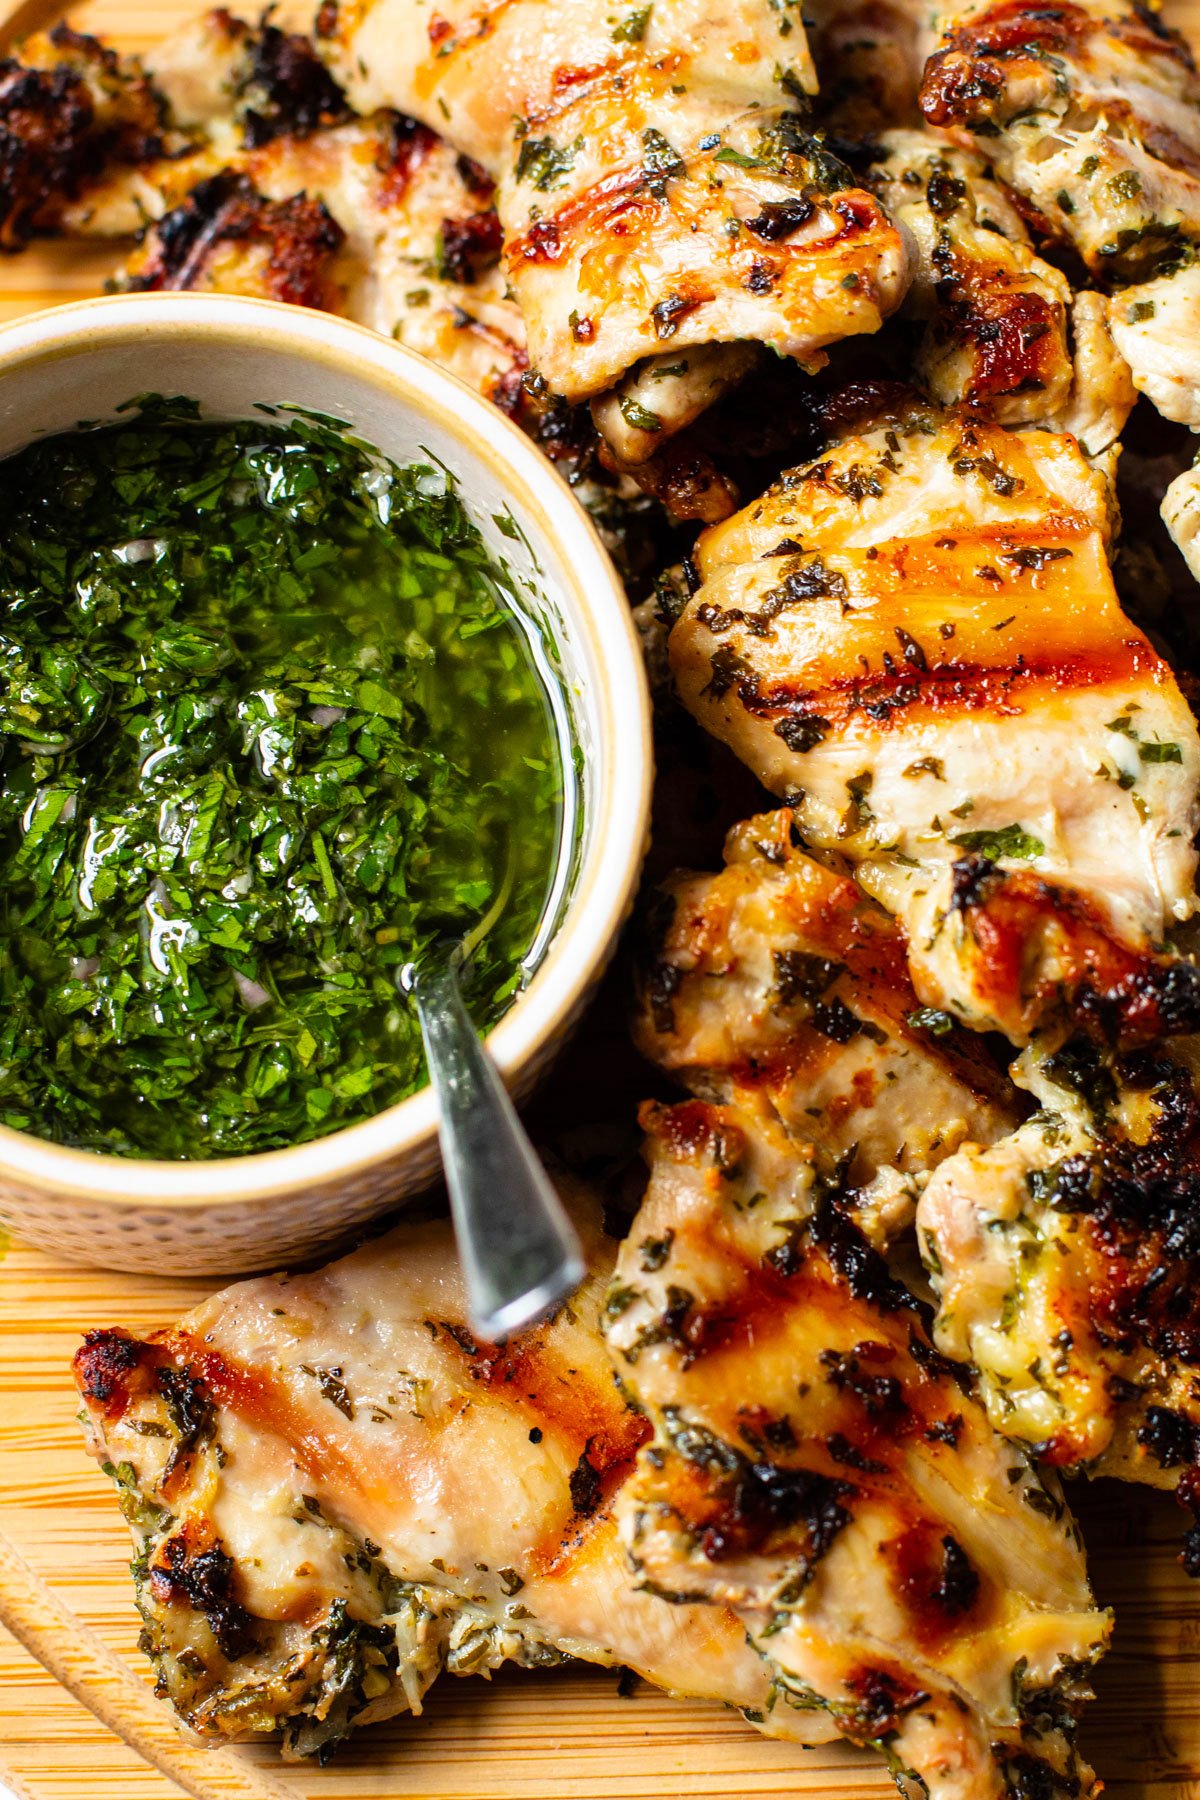 Chimichurri chicken cooked and ready to eat